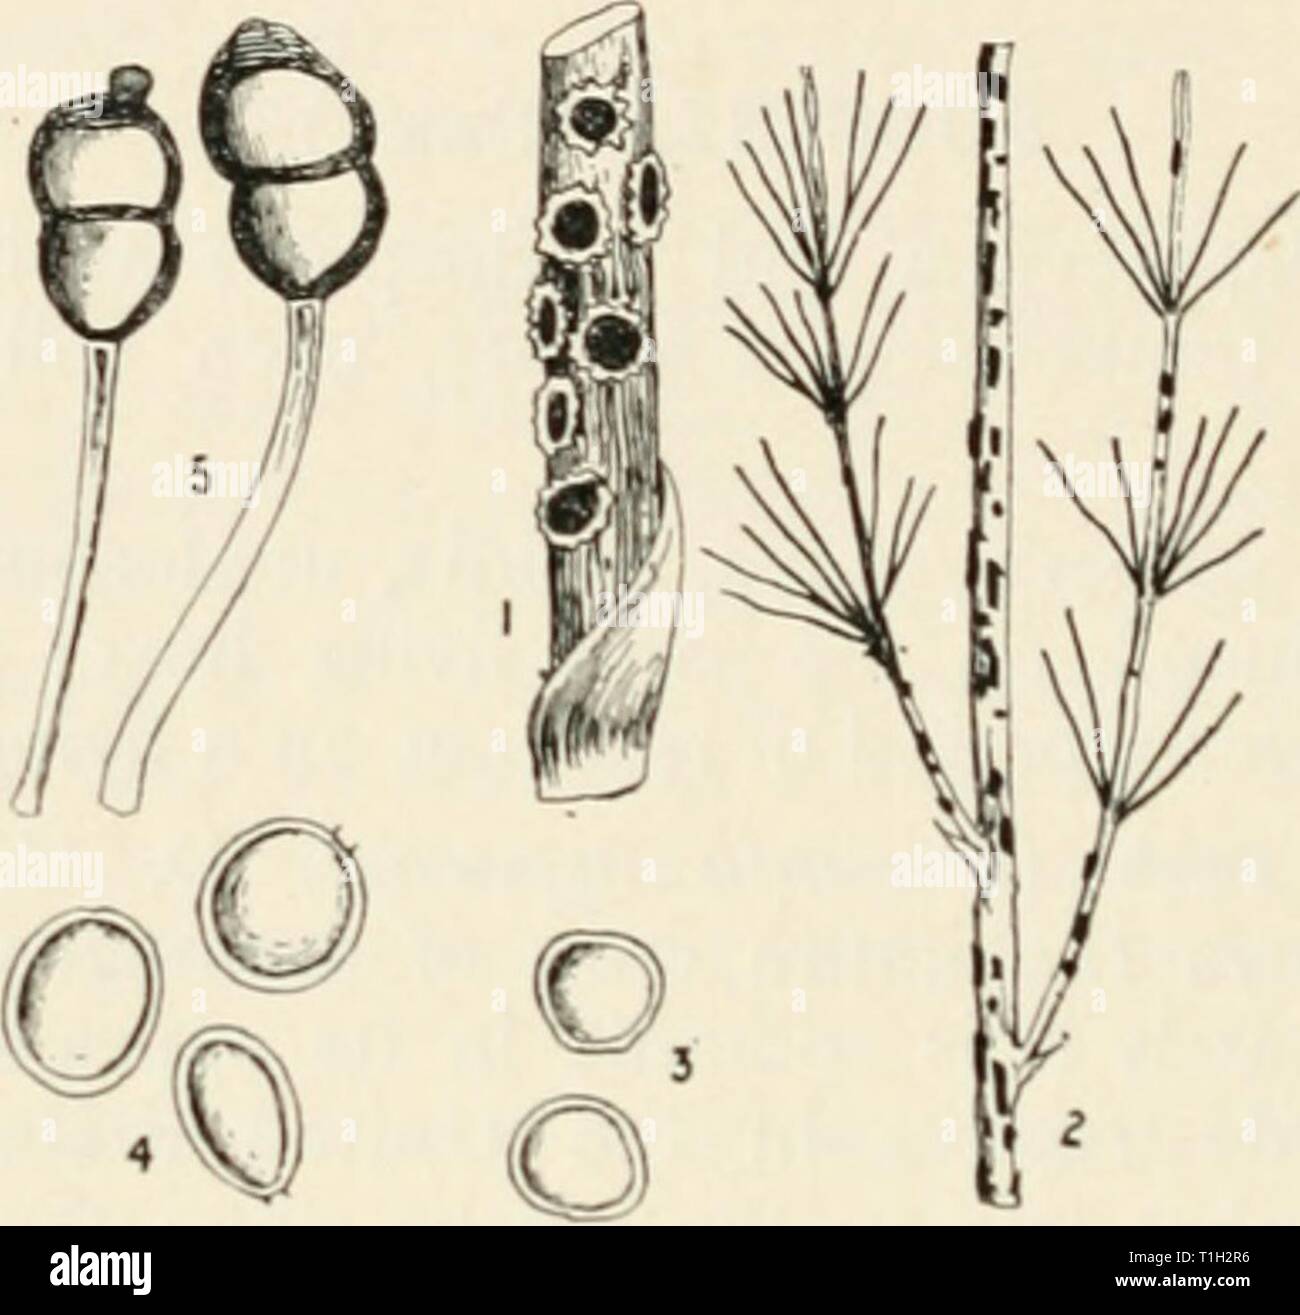 Diseases of cultivated plants and Diseases of cultivated plants and trees  diseasesofcultiv00massuoft Year: [1910?]  298 DISEASES OF CULTIVATED PLANTS Mint rust, caused by Puccinia fnenihae (Pers.), often com- pletely destroys entire beds of mint. All stages of the fungus are produced on the same host. The cluster-cup condition of the fungus appears first somewhat early in the season, and is most abundant on the stems, which become much twisted, distorted, and swollen, and more or less covered with the    I'iG. 87.—Puccinia asparagi. 1, aecidium stage on a young shoot of asparagus ; 2, teleuto Stock Photo